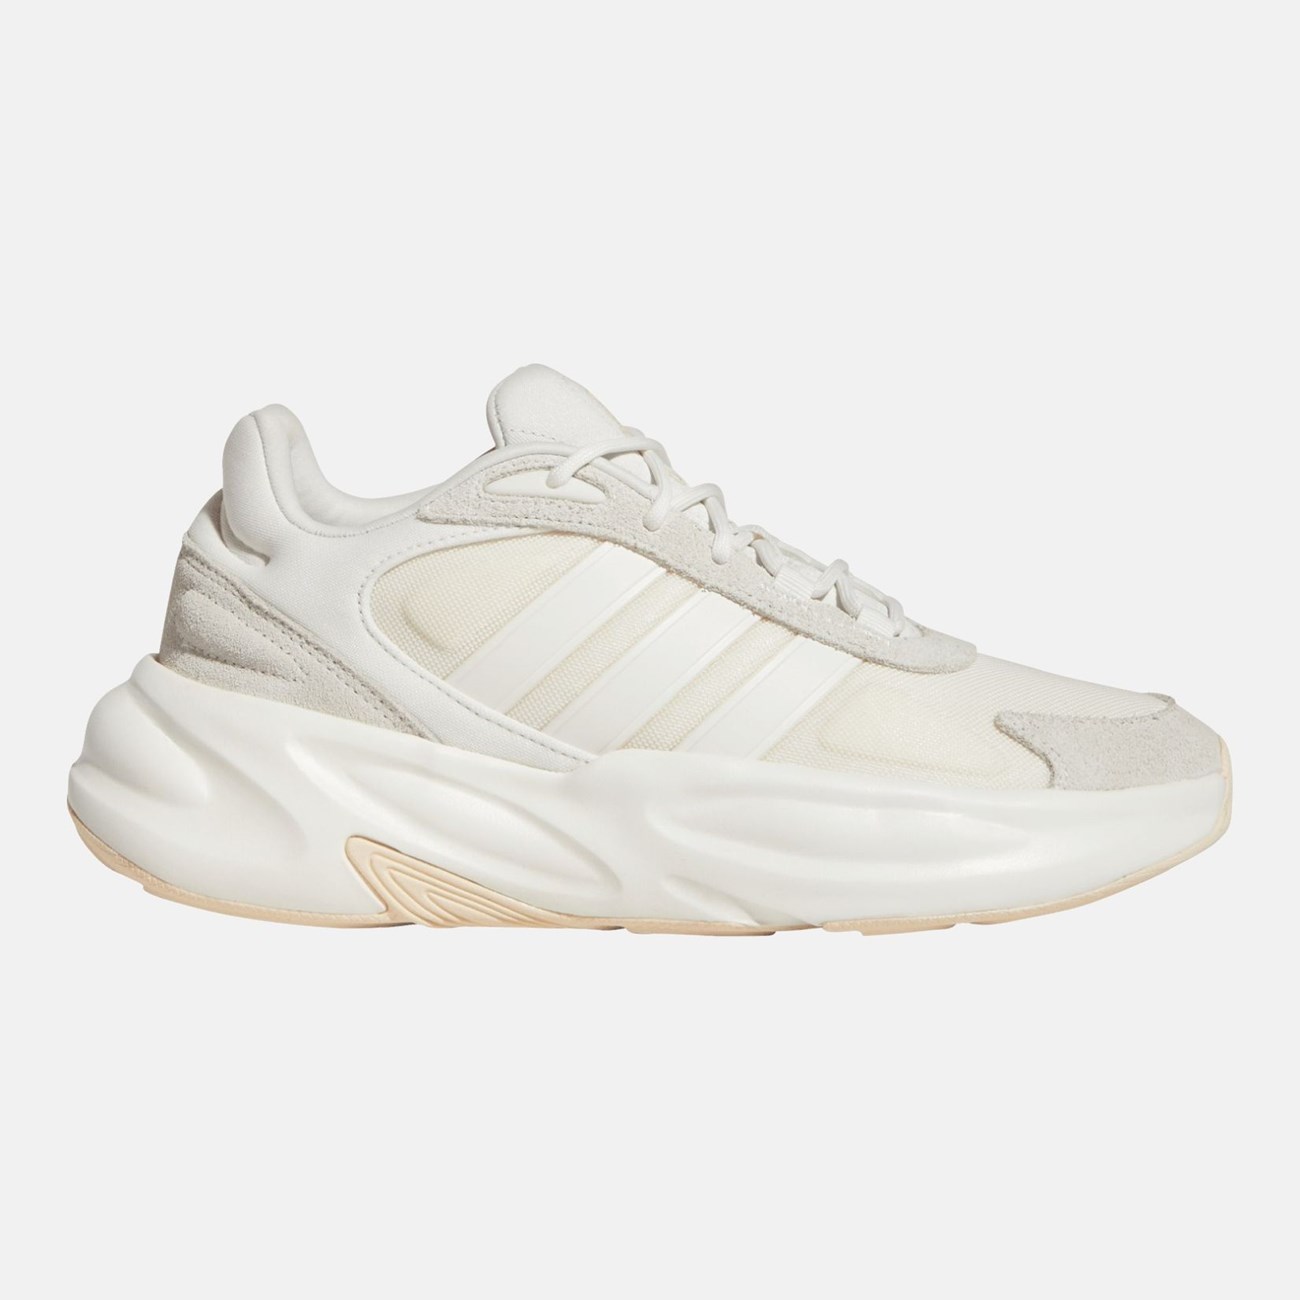 shy monthly Lost adidas INTERSPORT